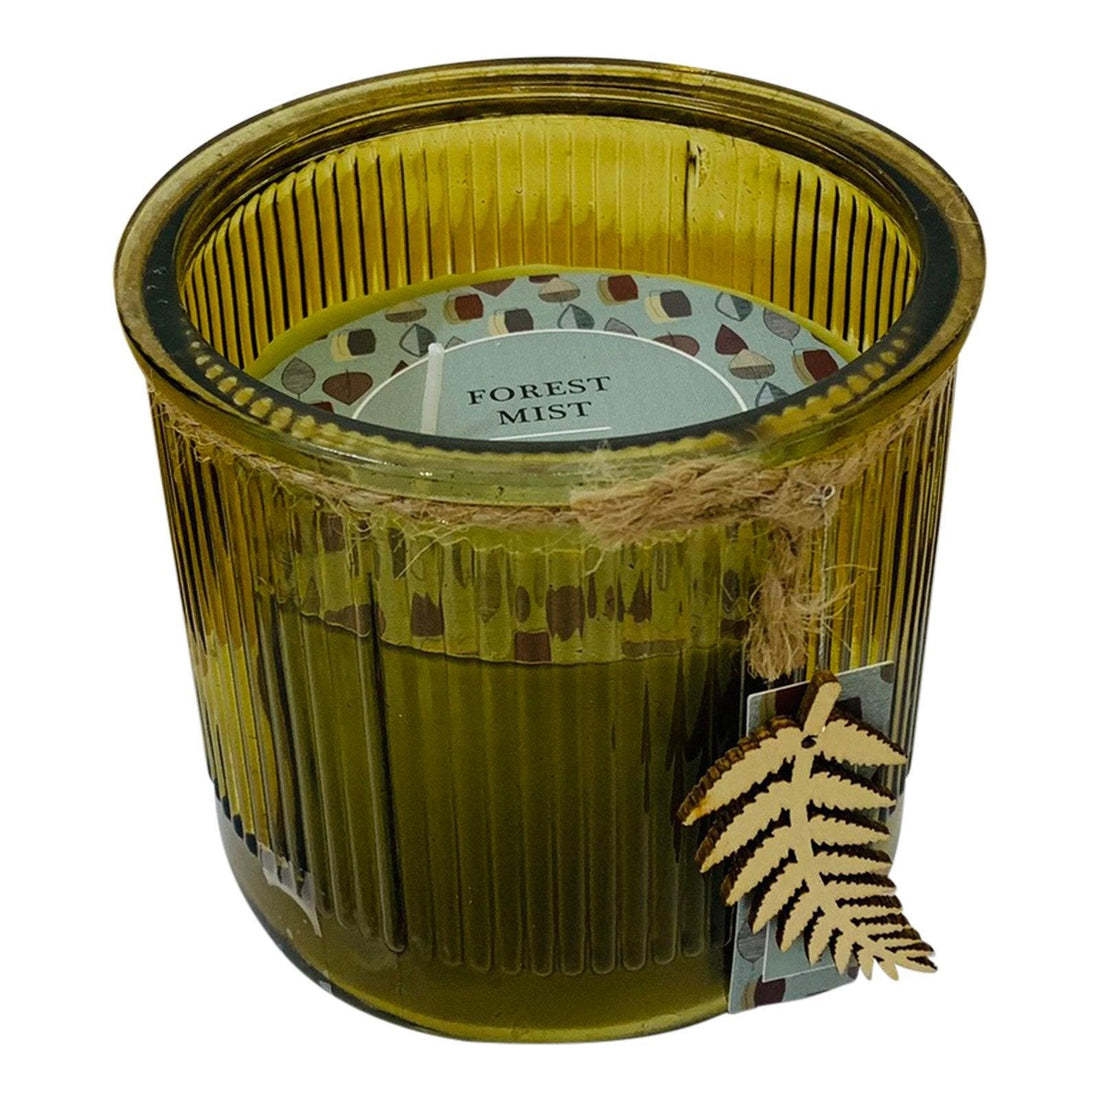 Forest Mist Leaf Glass Scented Candle (Assorted Colours) - £20.99 - Candles 